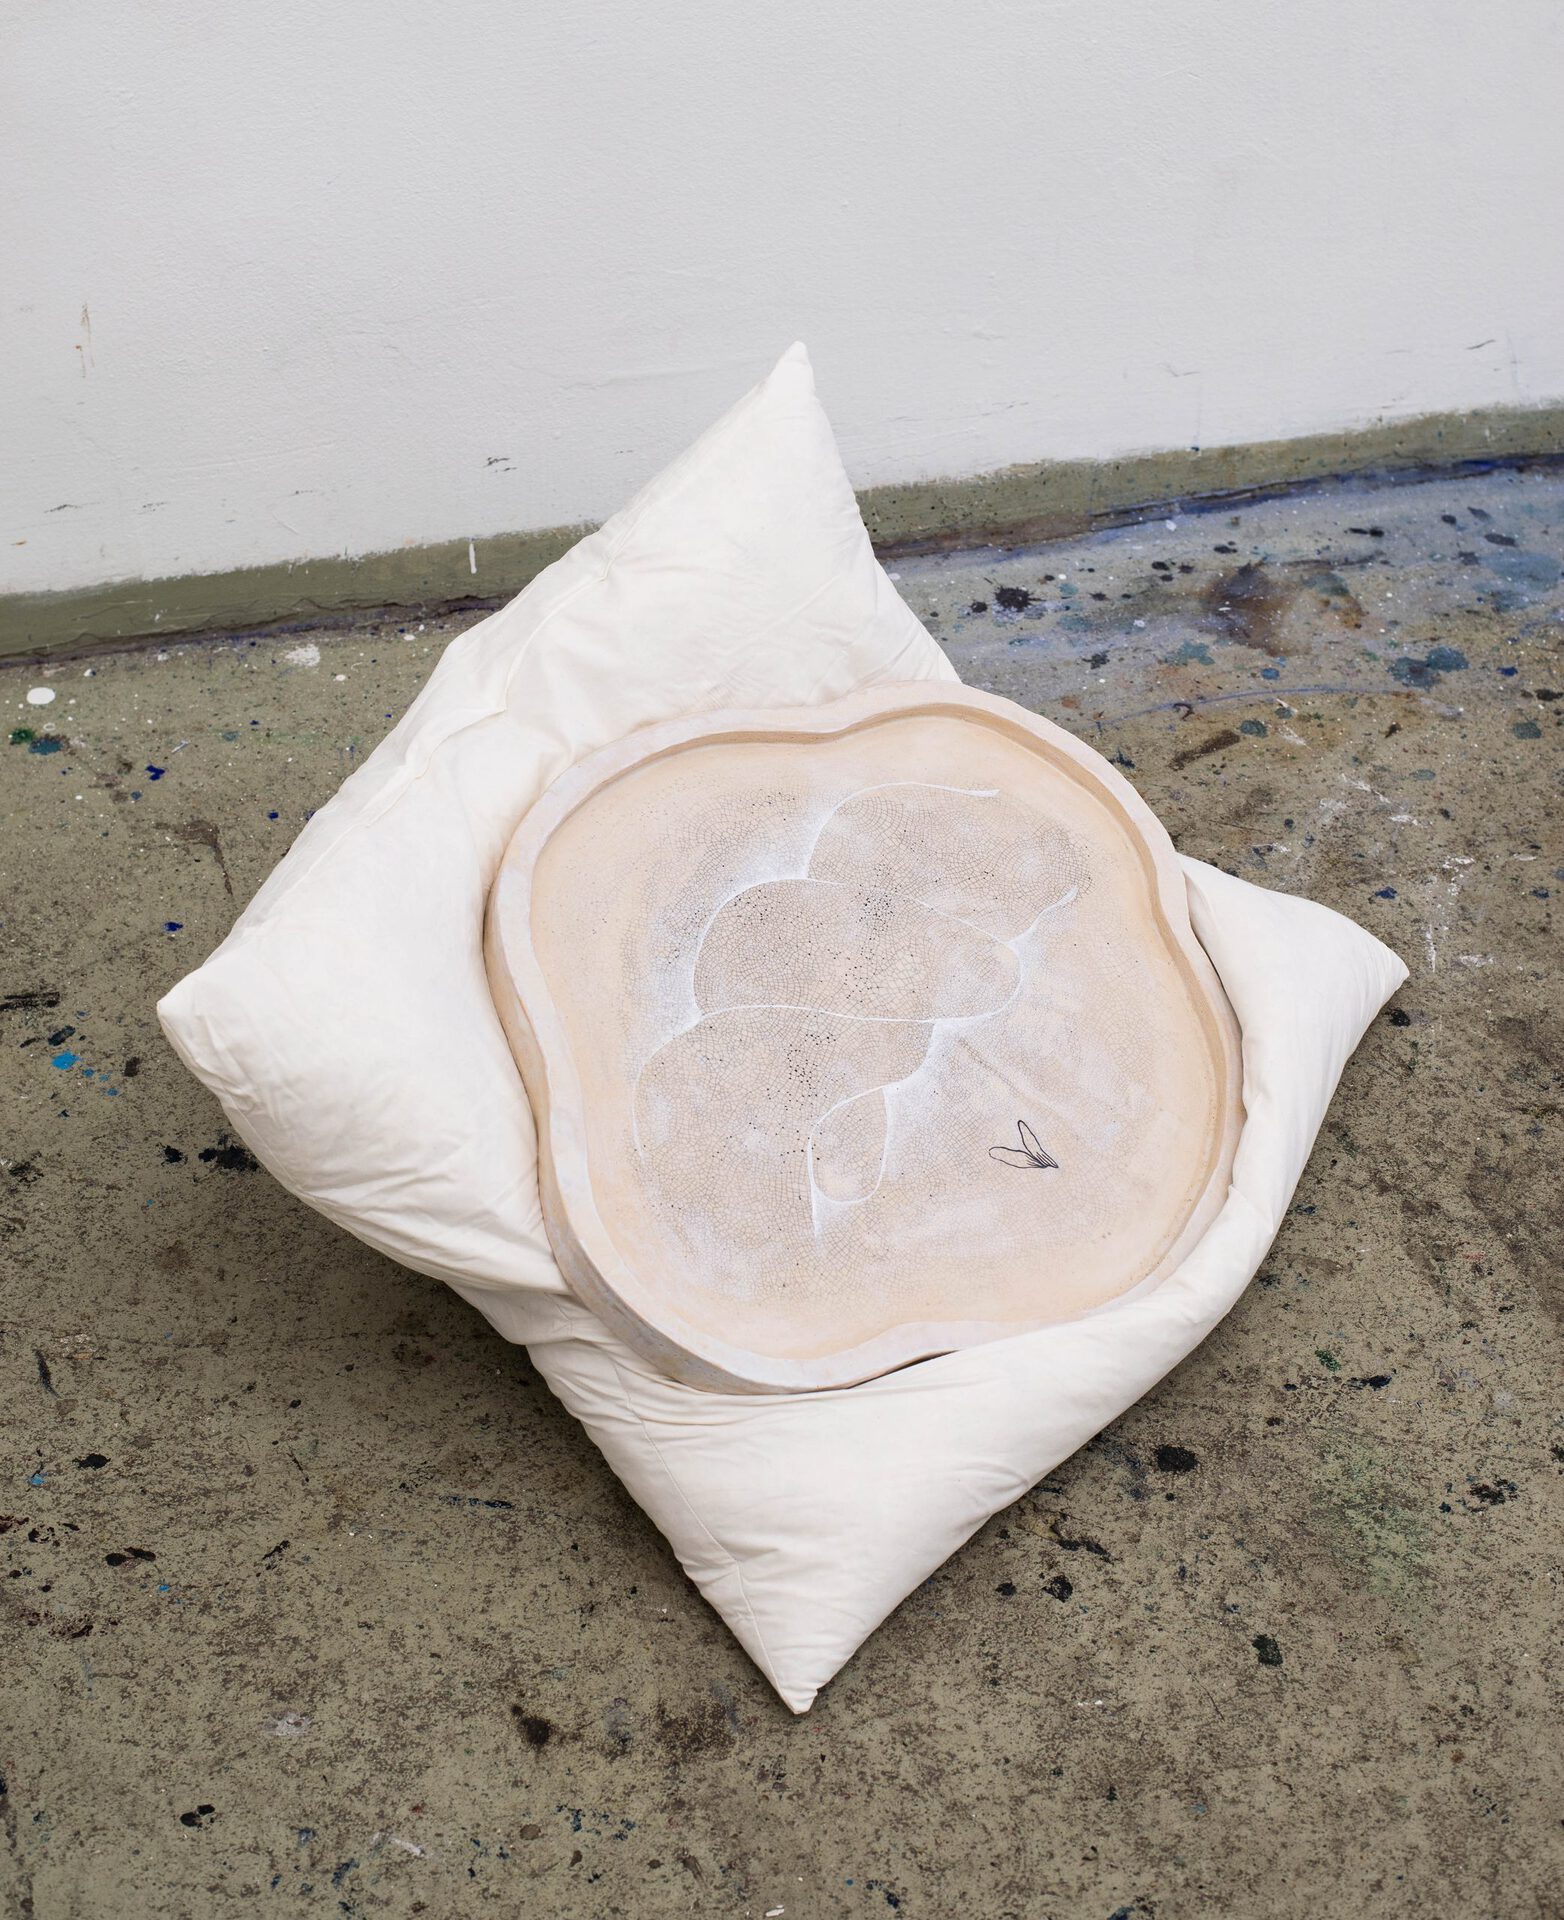 Pho 2, 2021, oil on ceramics, ~ 30 x 40 cm, installed on feather pillow